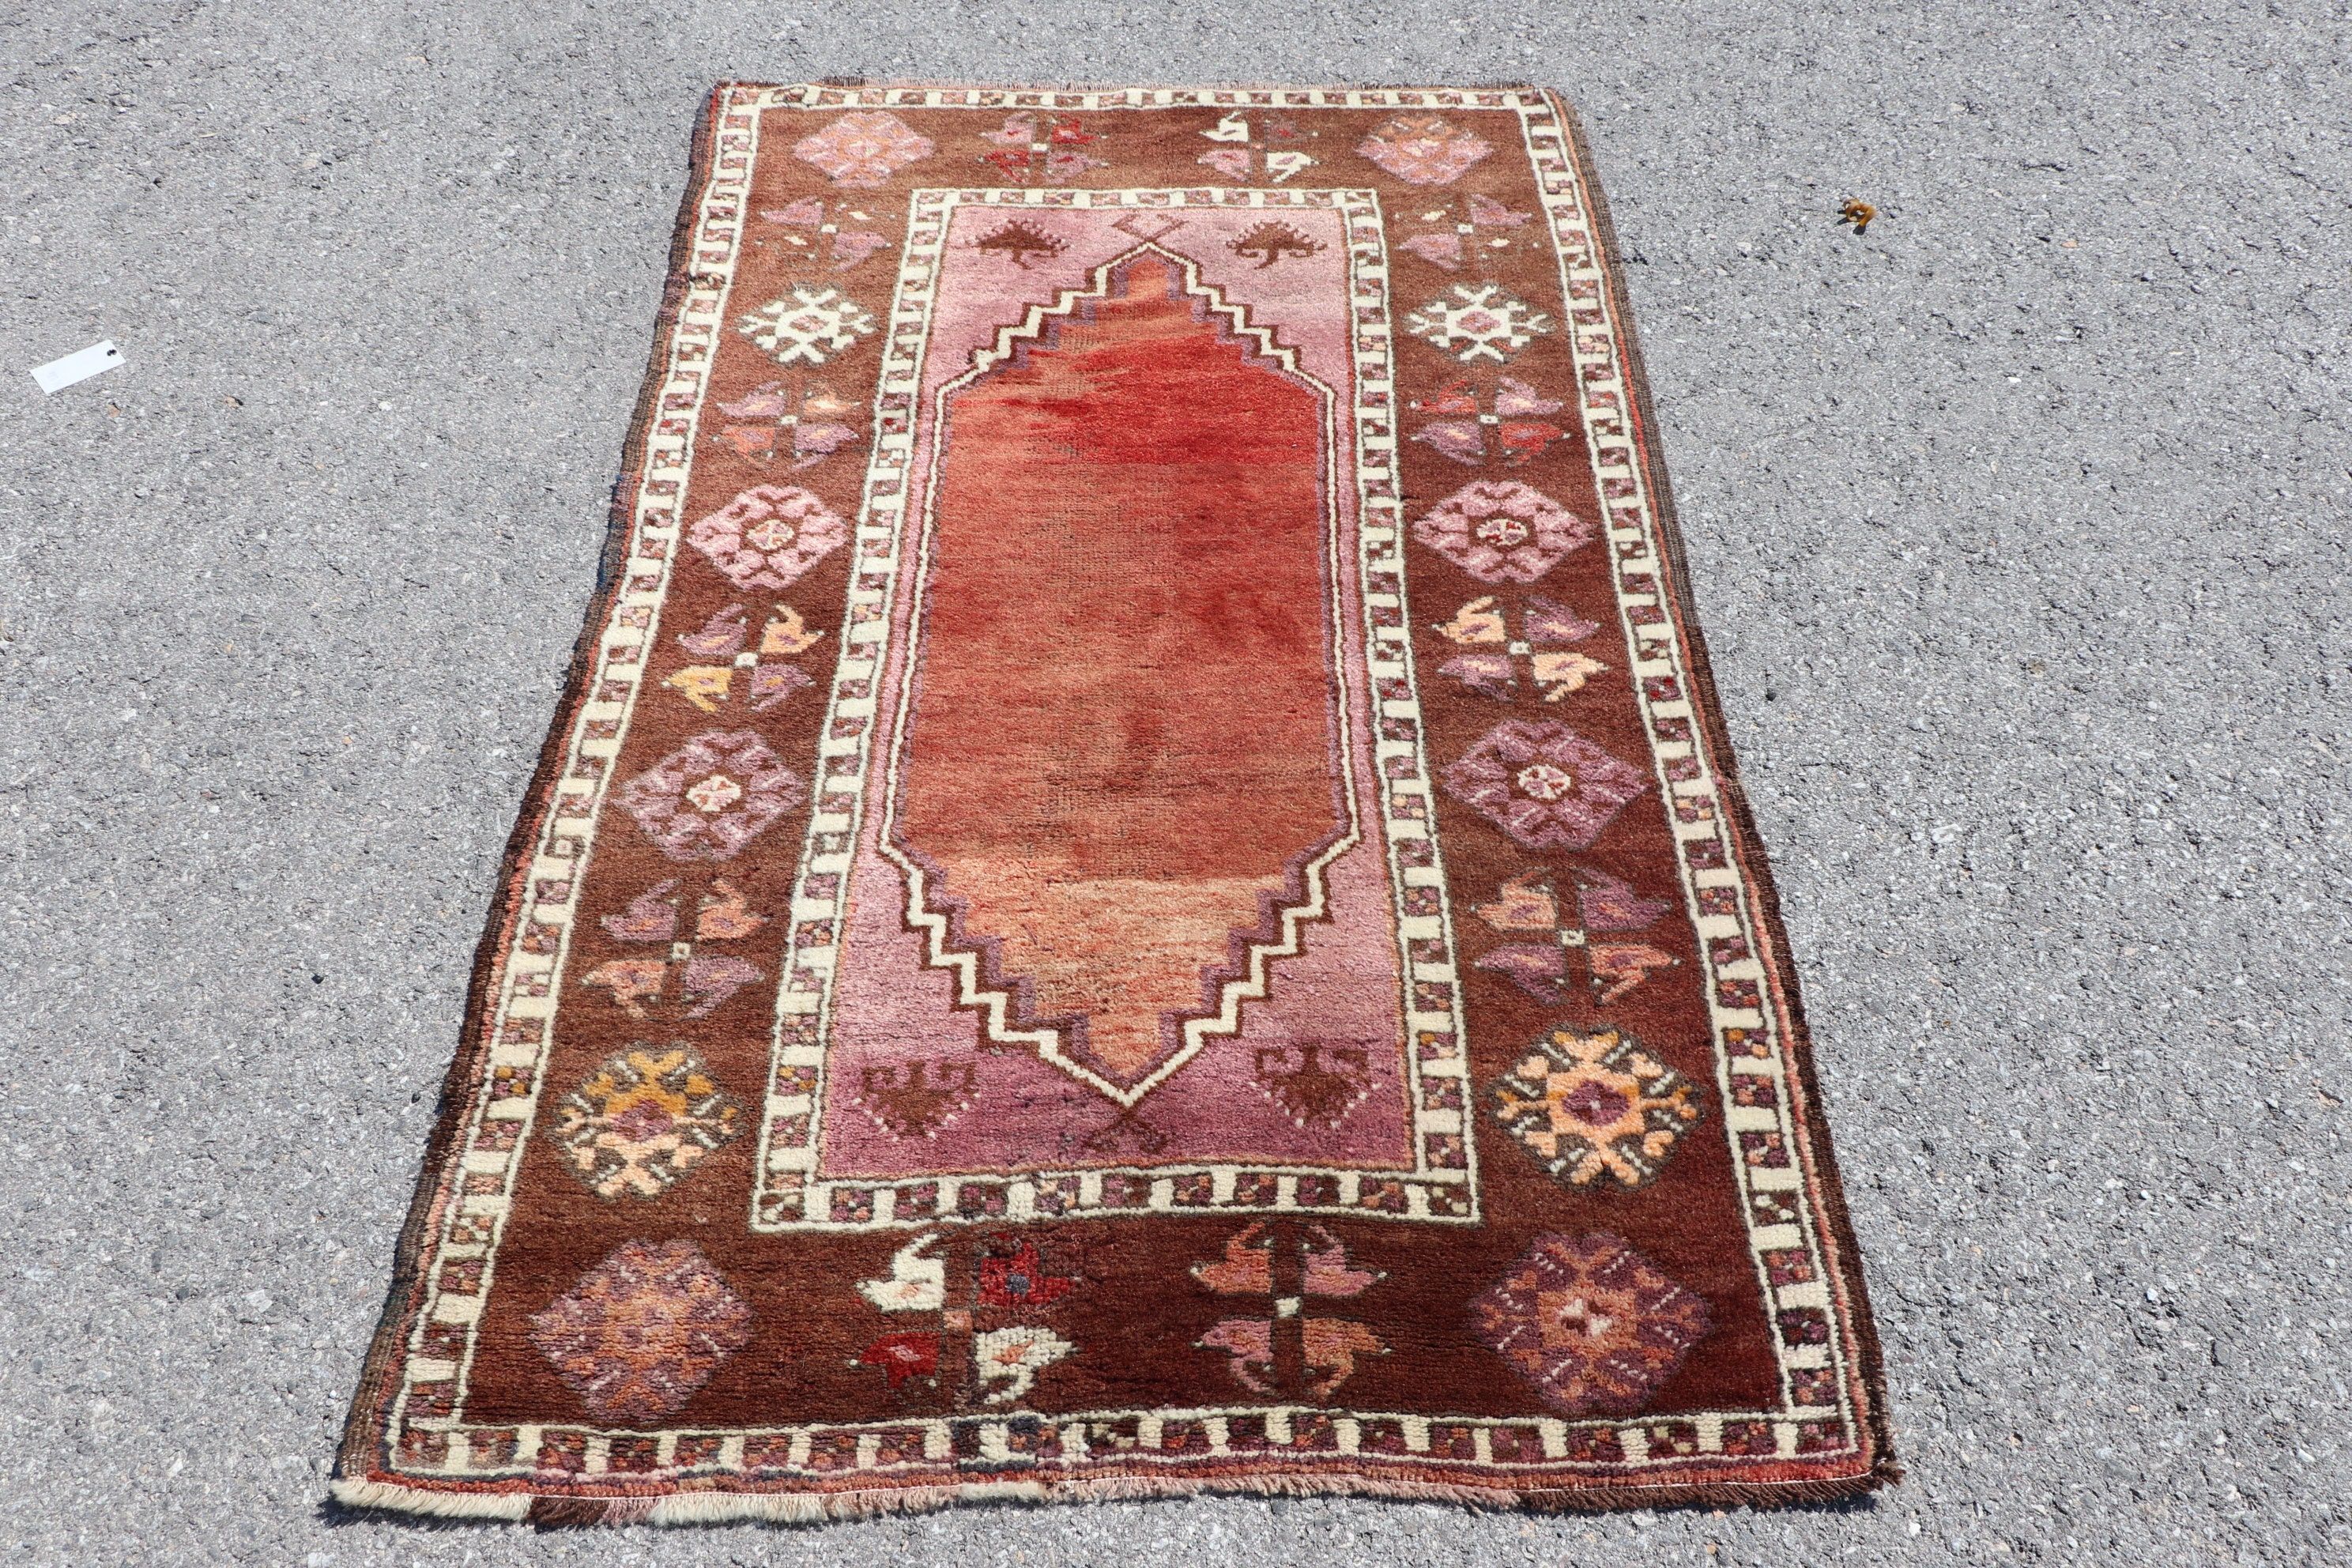 Turkish Rug, Kitchen Rug, Moroccan Rug, Cute Rug, Entry Rug, Anatolian Rugs, Vintage Rug, Brown Oriental Rugs, 3.4x5.3 ft Accent Rugs